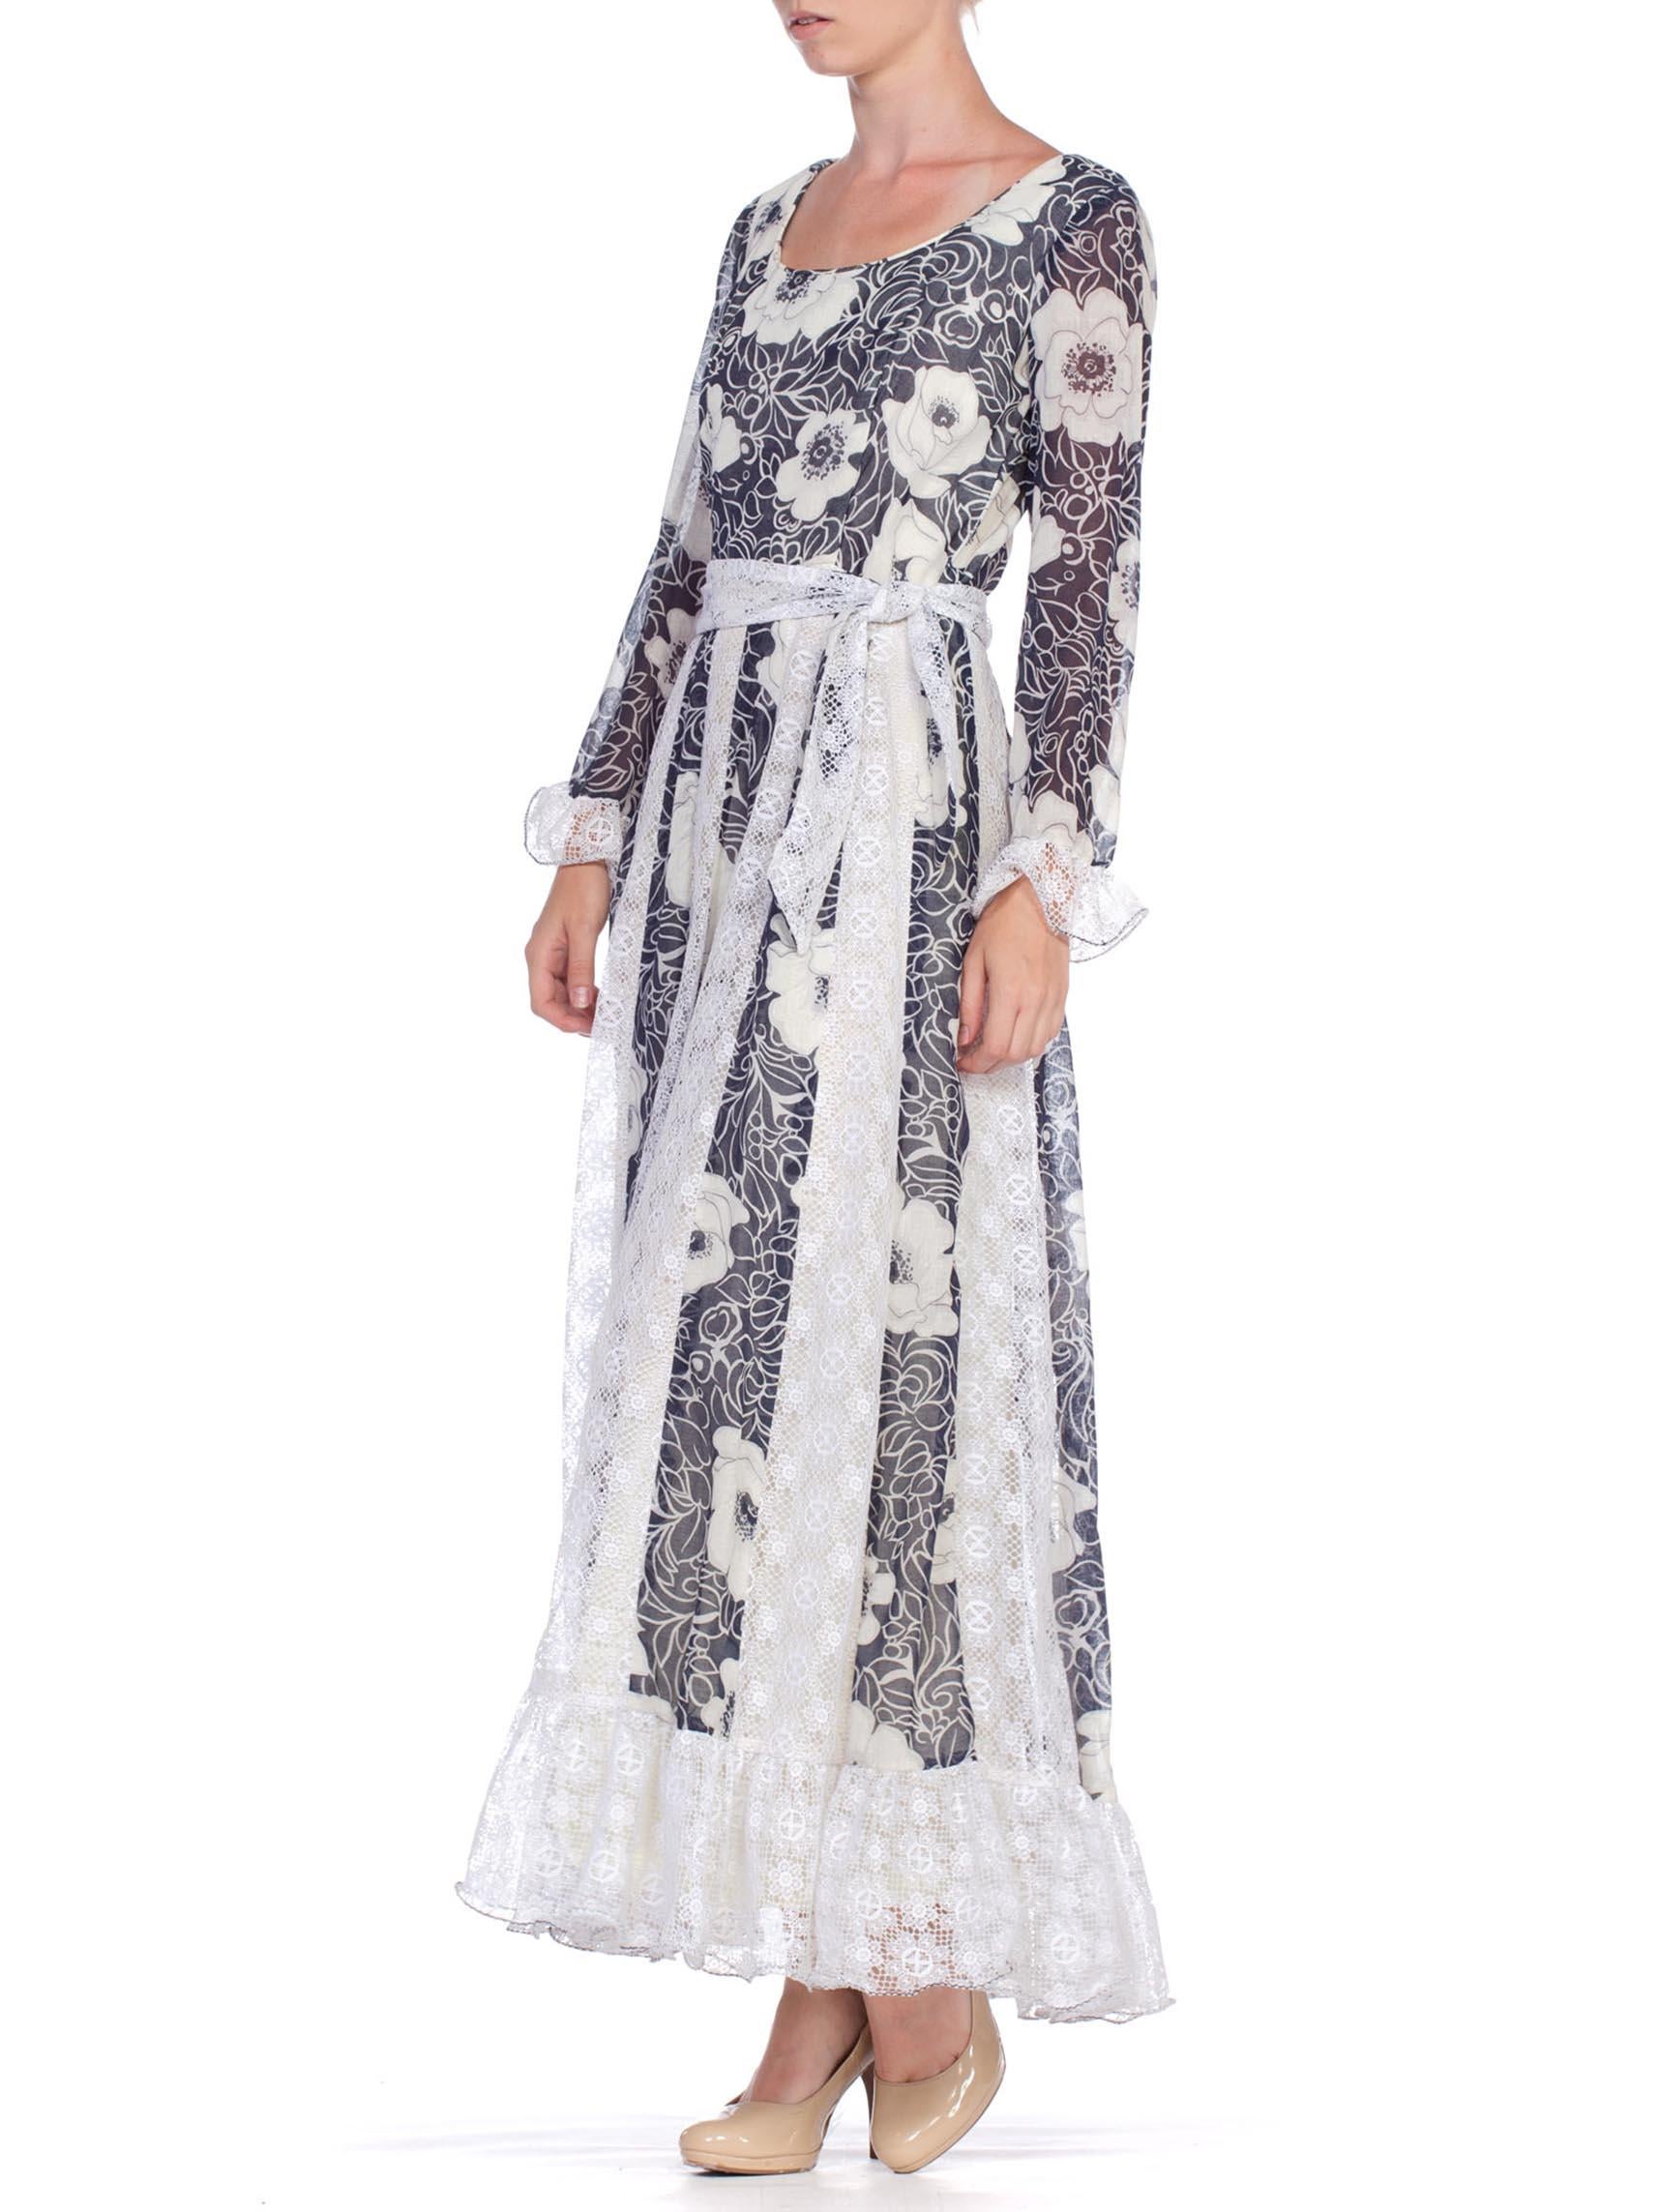 1970's Boho Victorian Revival Floral Cotton And Lace Dress 4